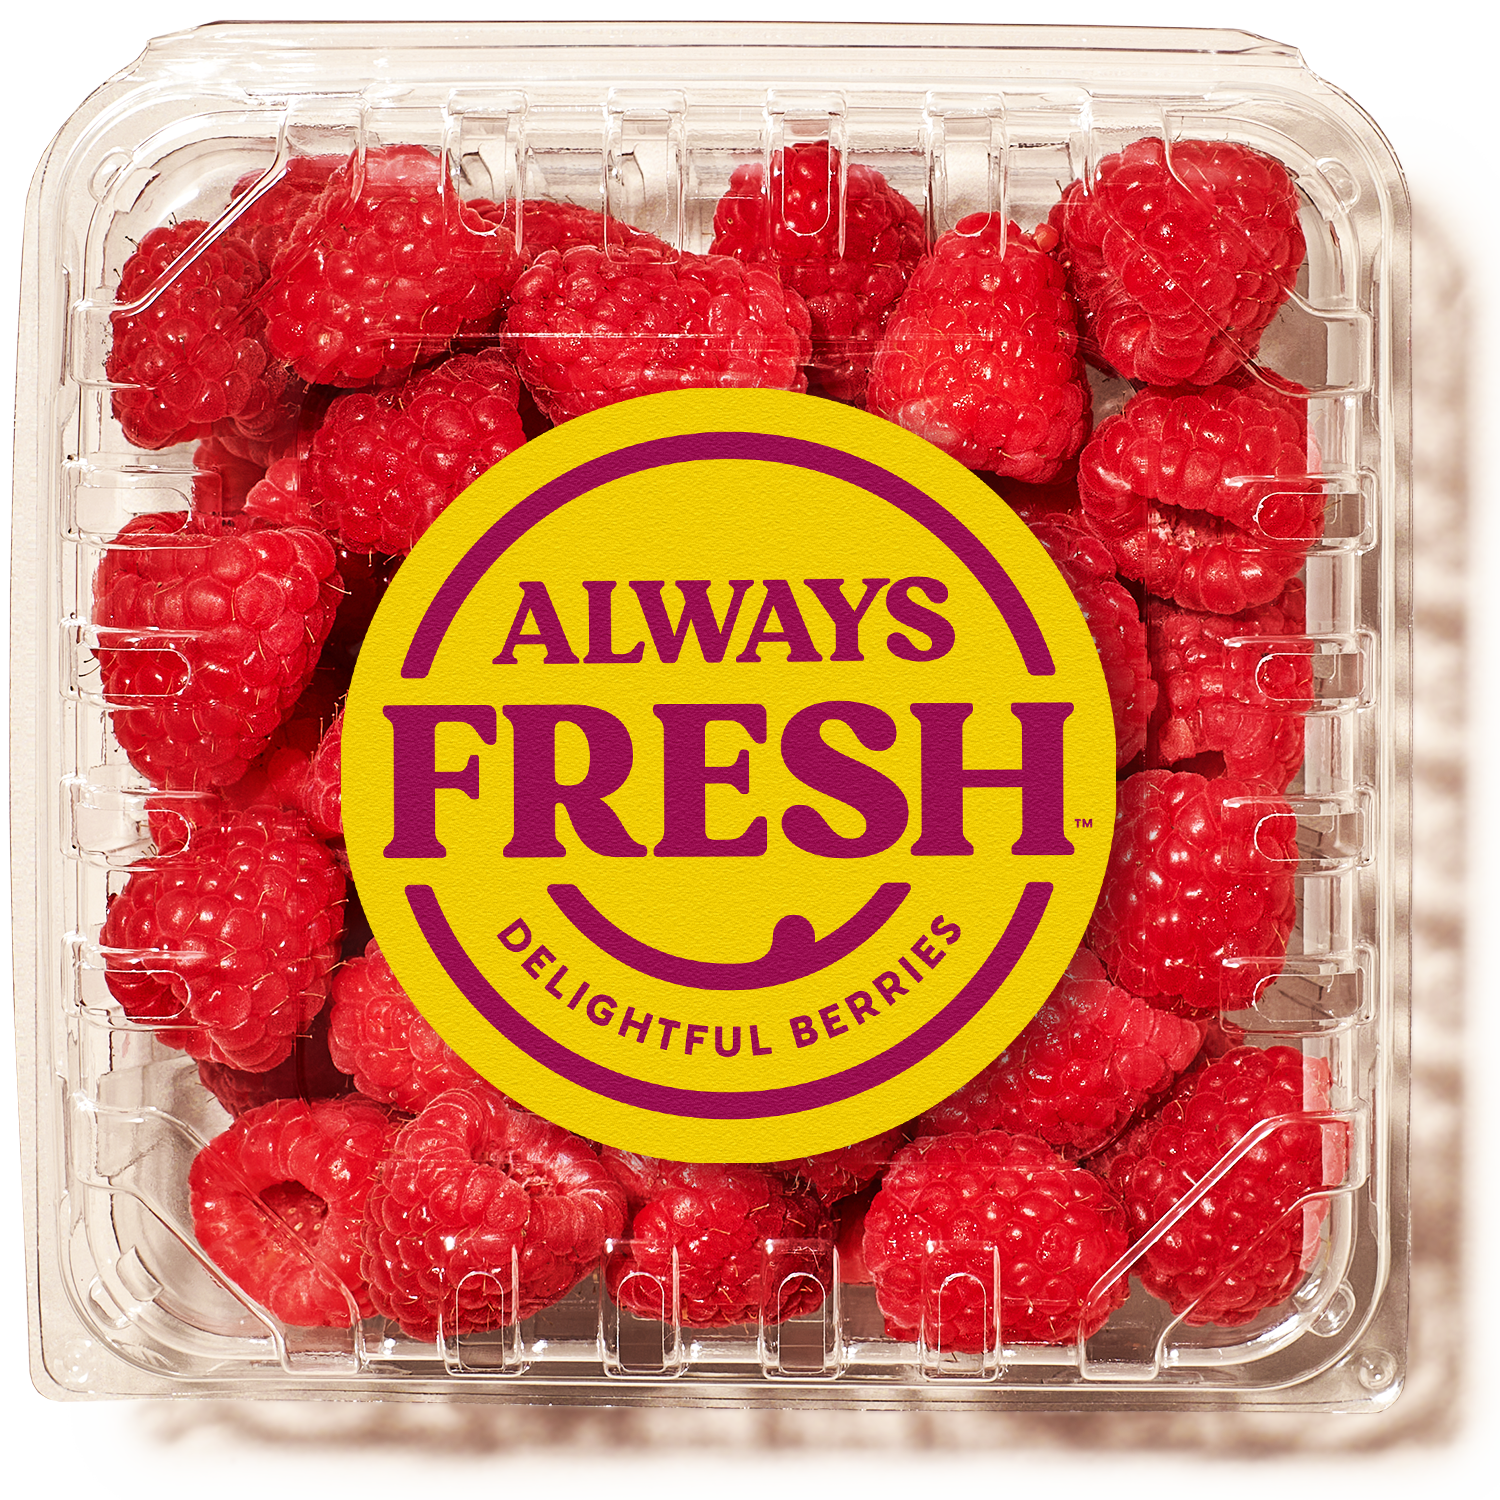 Image of Always Fresh raspberries in clear container with Always Fresh logo and the tag line Delightful Berries.